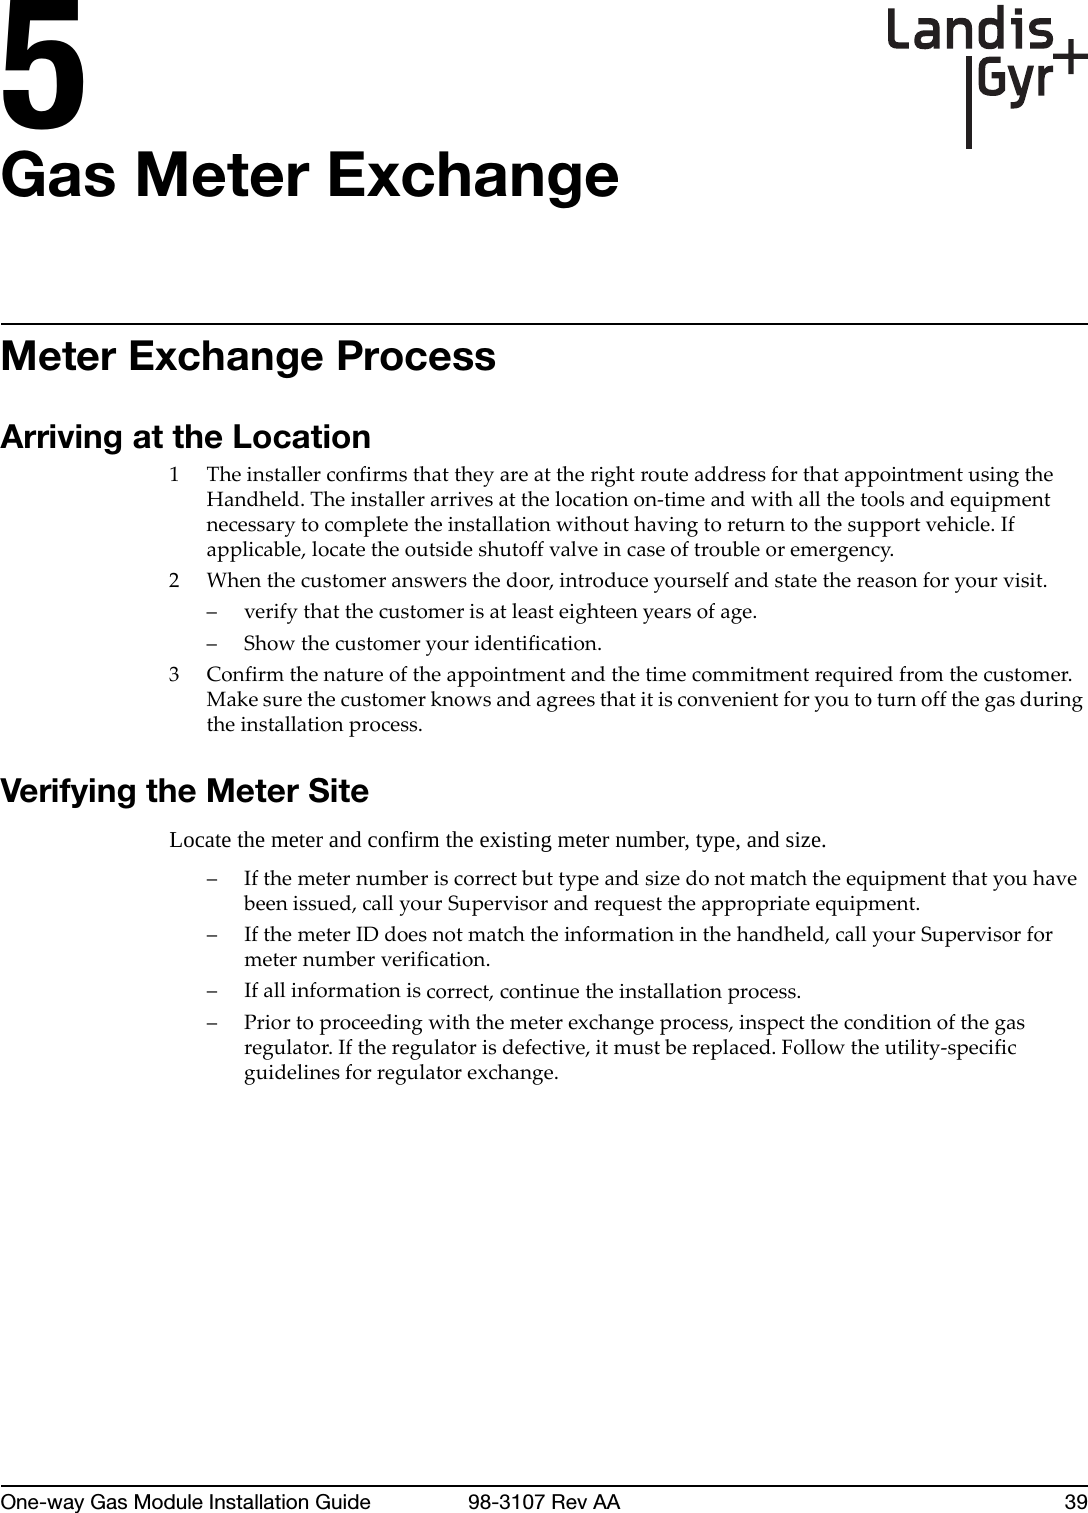 5One-way Gas Module Installation Guide 98-3107 Rev AA 39Gas Meter ExchangeMeter Exchange ProcessArriving at the Location1TheinstallerconfirmsthattheyareattherightrouteaddressforthatappointmentusingtheHandheld.Theinstallerarrivesatthelocationon‐timeandwithallthetoolsandequipmentnecessarytocompletetheinstallationwithouthavingtoreturntothesupportvehicle.Ifapplicable,locatetheoutsideshutoffvalveincaseoftroubleoremergency.2Whenthecustomeranswersthedoor,introduceyourselfandstatethereasonforyourvisit.–verifythatthecustomerisatleasteighteenyearsofage.– Showthecustomeryouridentification.3Confirmthenatureoftheappointmentandthetimecommitmentrequiredfromthecustomer.Makesurethecustomerknowsandagreesthatitisconvenientforyoutoturnoffthegasduringtheinstallationprocess.Verifying the Meter SiteLocate the meter and confirm the existing meter number, type, and size. –Ifthemeternumberiscorrectbuttypeandsizedonotmatchtheequipmentthatyouhavebeenissued,callyourSupervisorandrequesttheappropriateequipment.–IfthemeterIDdoesnotmatchtheinformationinthehandheld,callyourSupervisorformeternumberverification.–Ifallinformationiscorrect,continuetheinstallationprocess.–Priortoproceedingwiththemeterexchangeprocess,inspecttheconditionofthegasregulator.Iftheregulatorisdefective,itmustbereplaced.Followtheutility‐specificguidelinesforregulatorexchange.